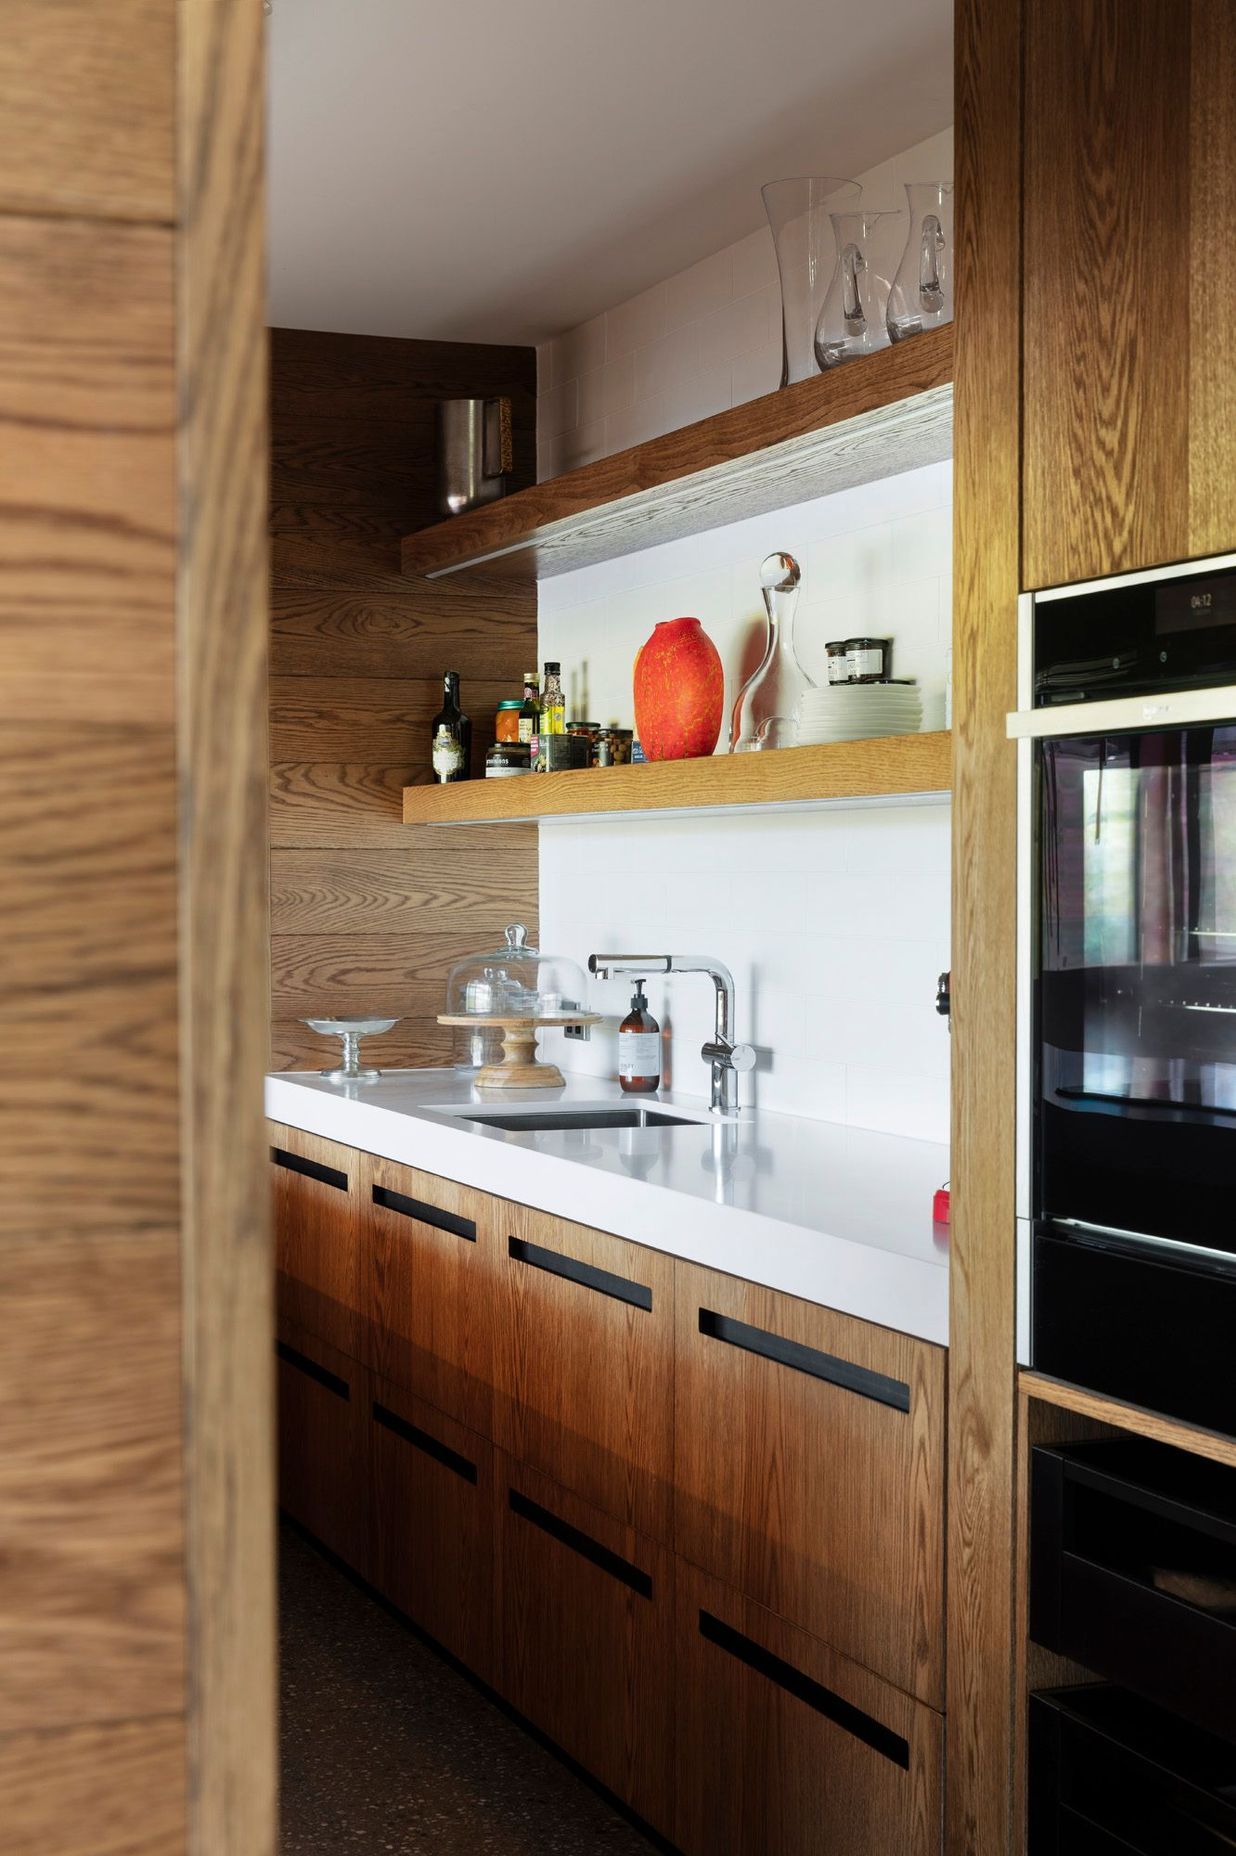 The scullery incorporates high-quality appliances, such as these Neff ovens..